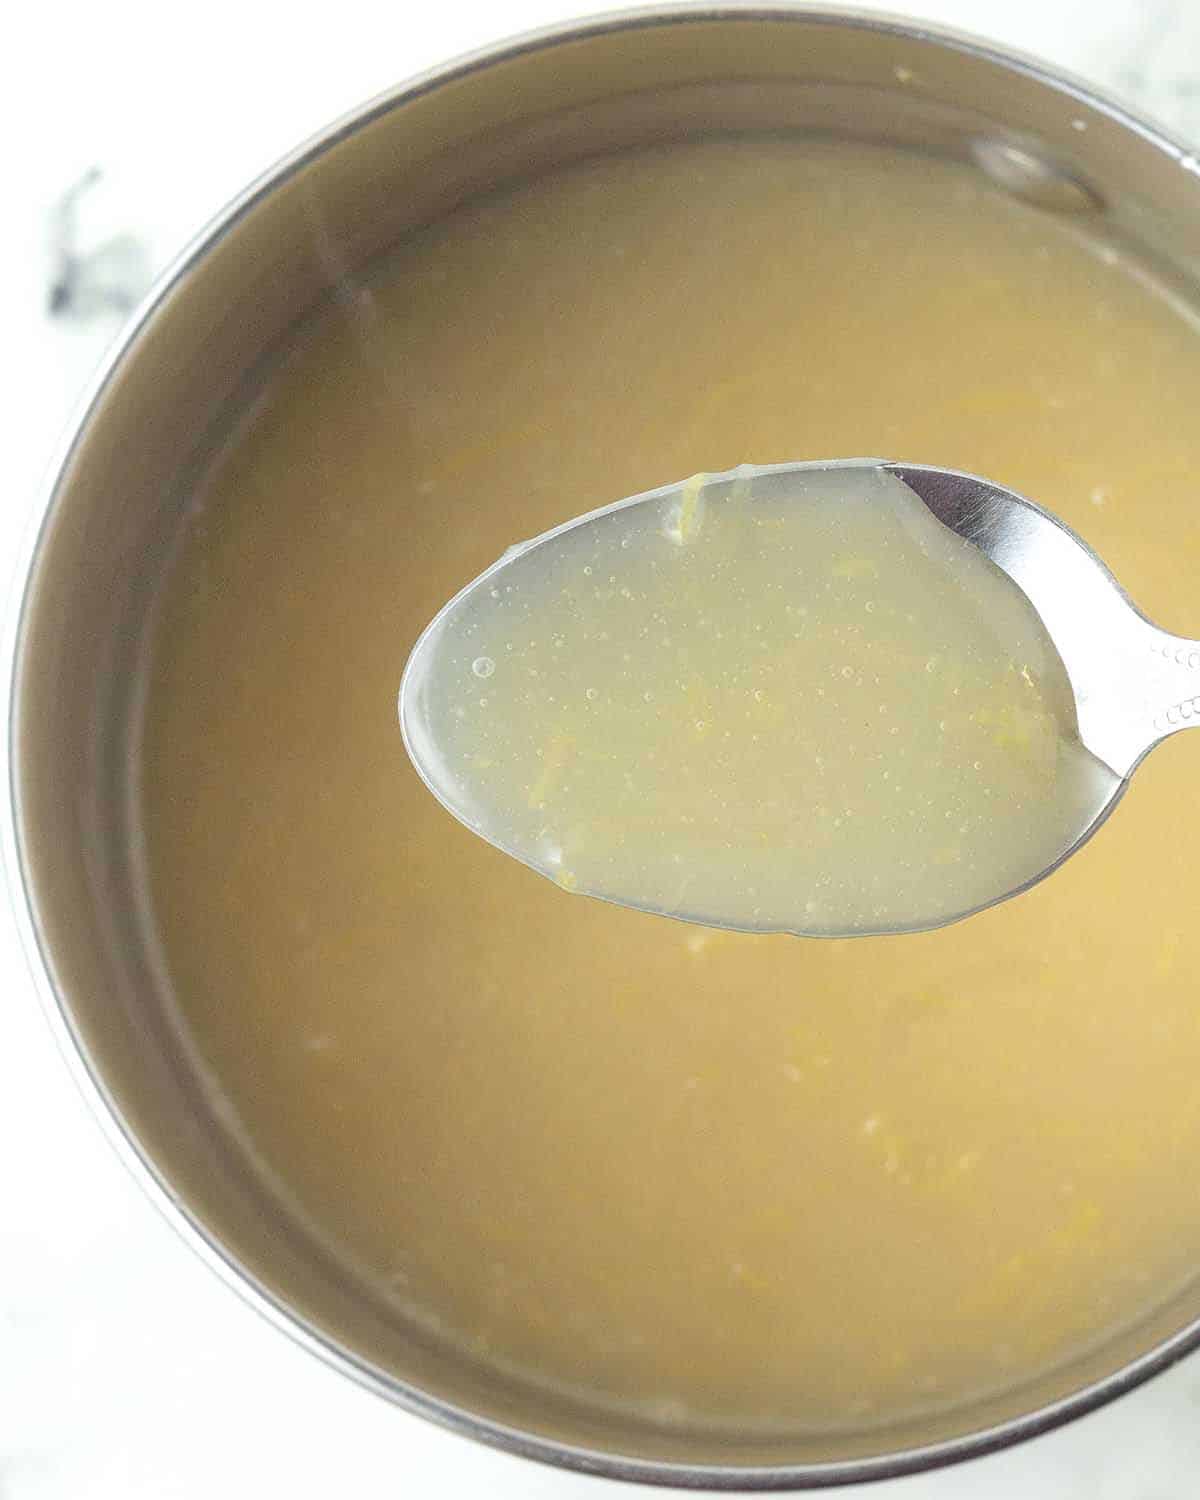 A spoon holding a small amount of vegan lemon curd above the pot it’s being prepared in.